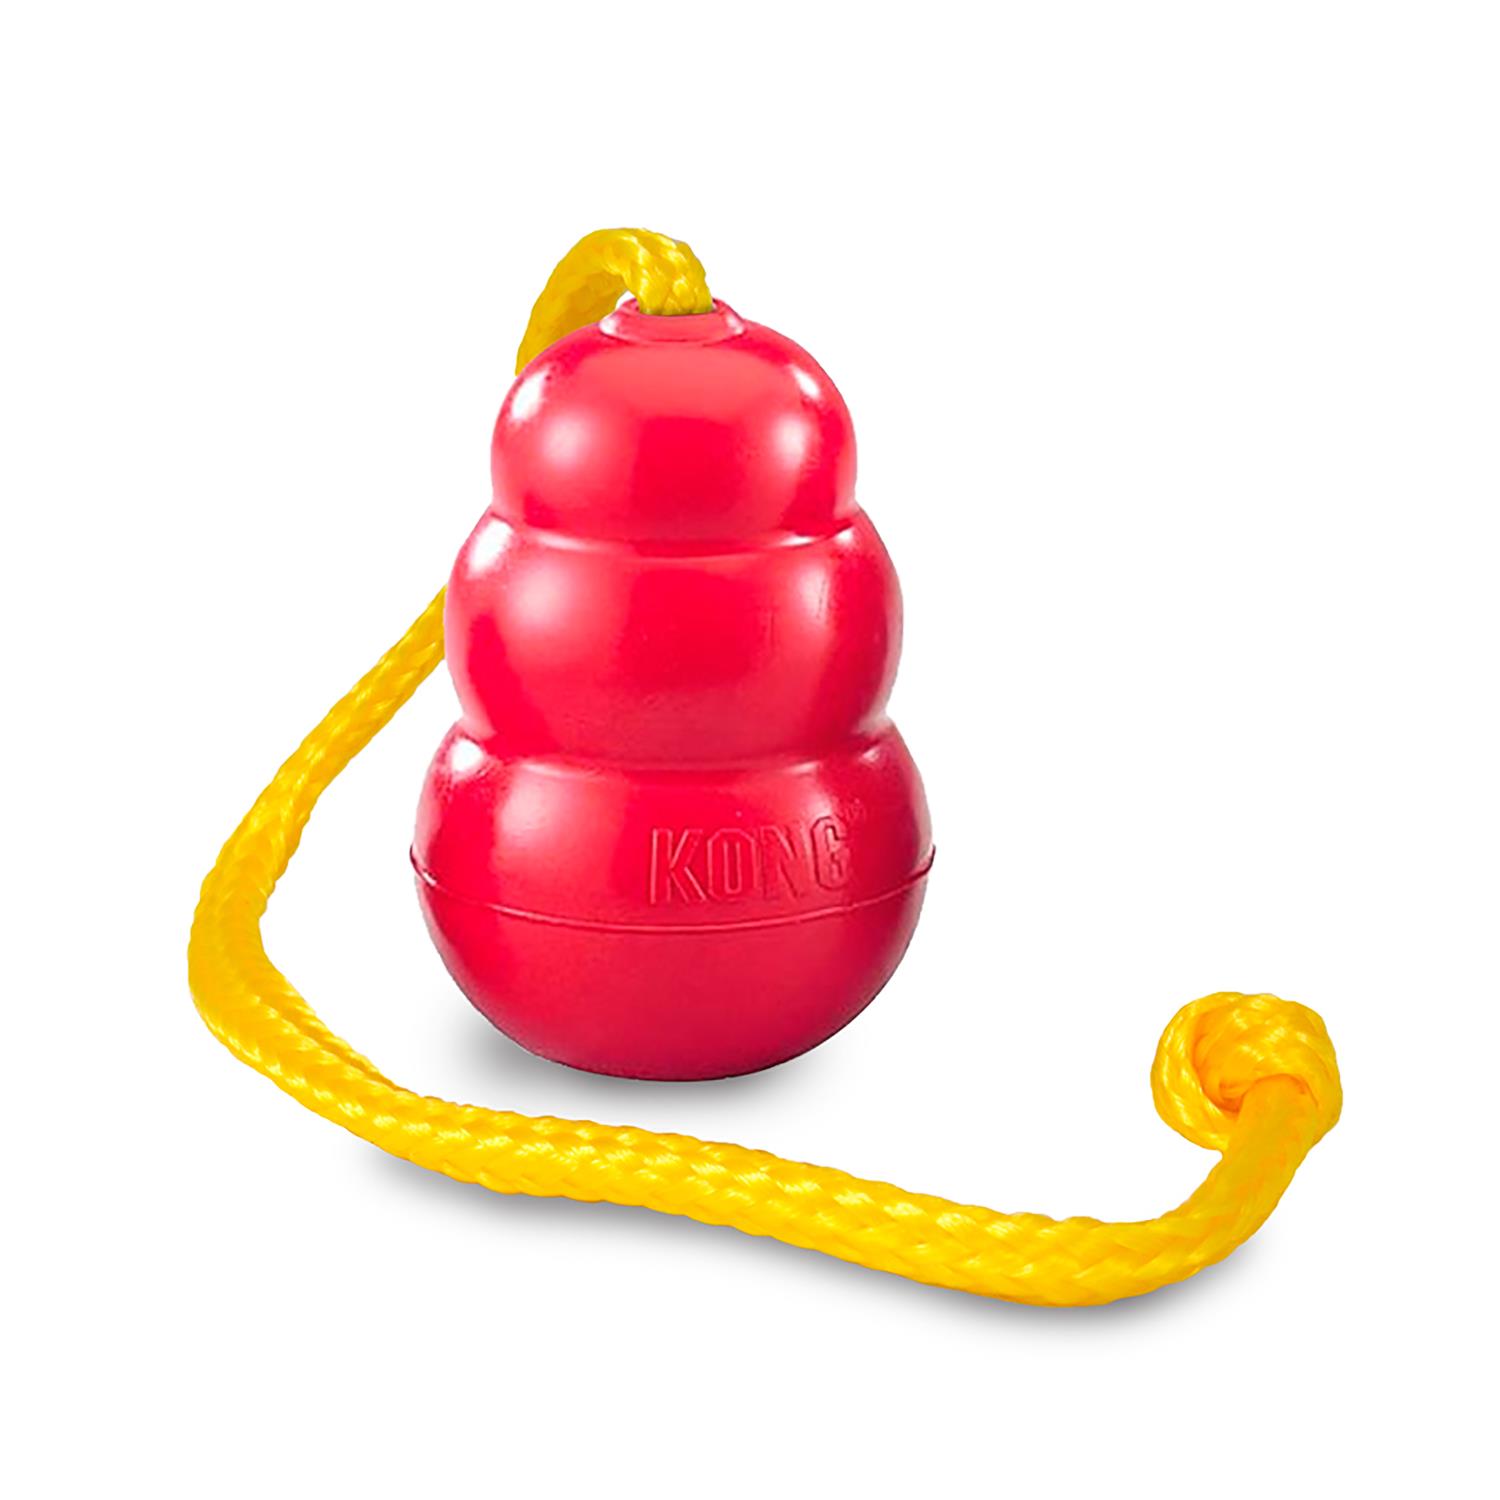 KONG Classic w/Rope, large, T1FE